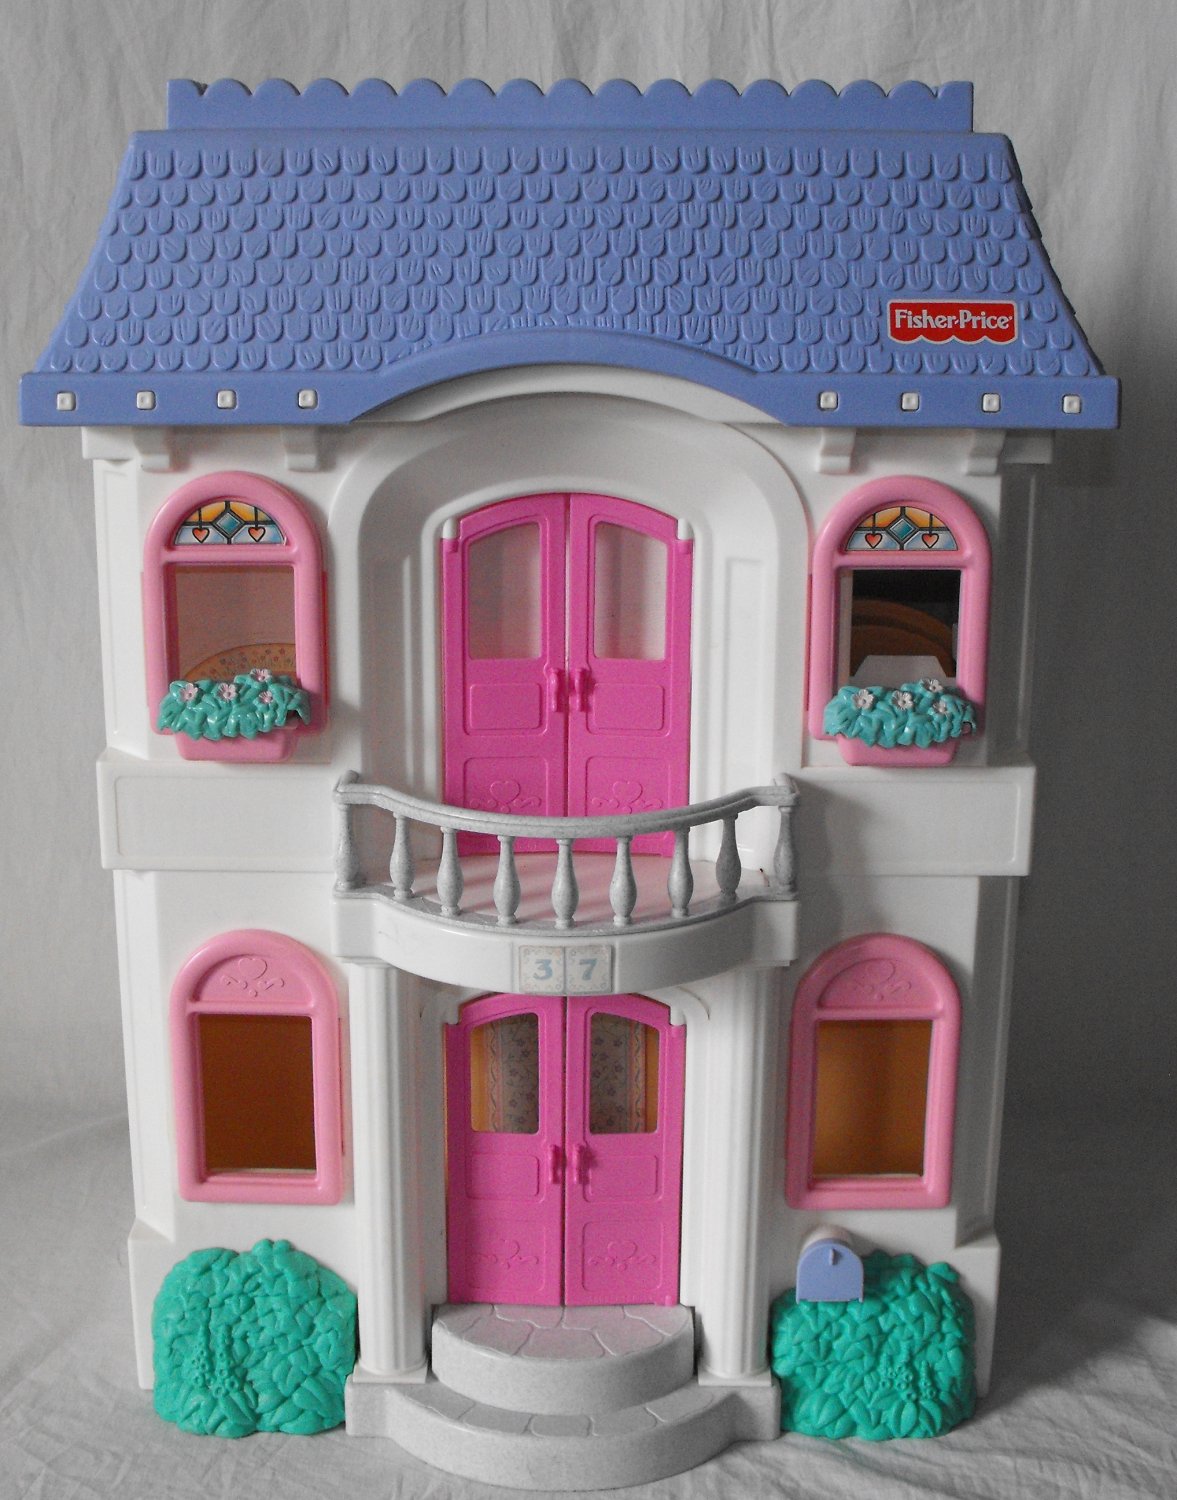 fisher price dollhouse 2000